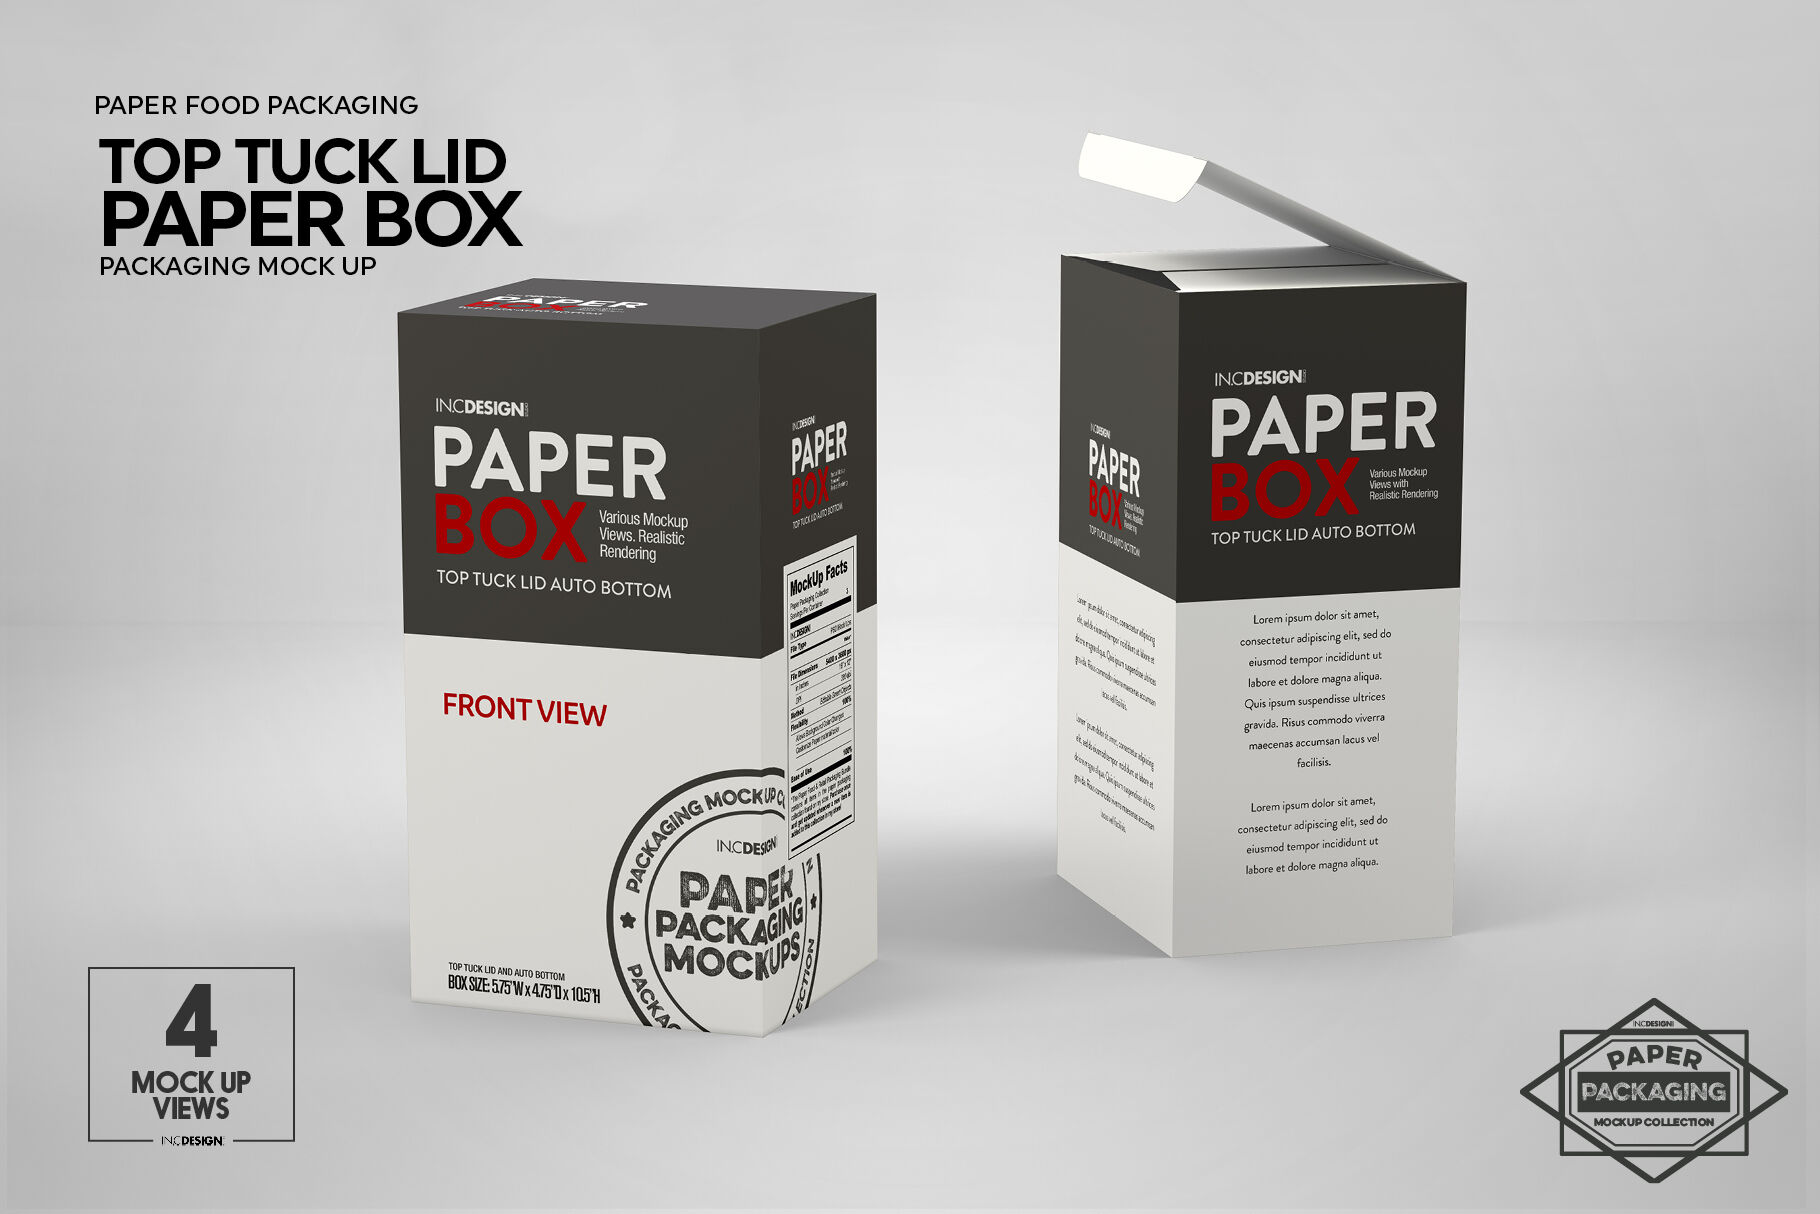 Download Juice Box Mockup Front View - Free Mockups | PSD Template ...